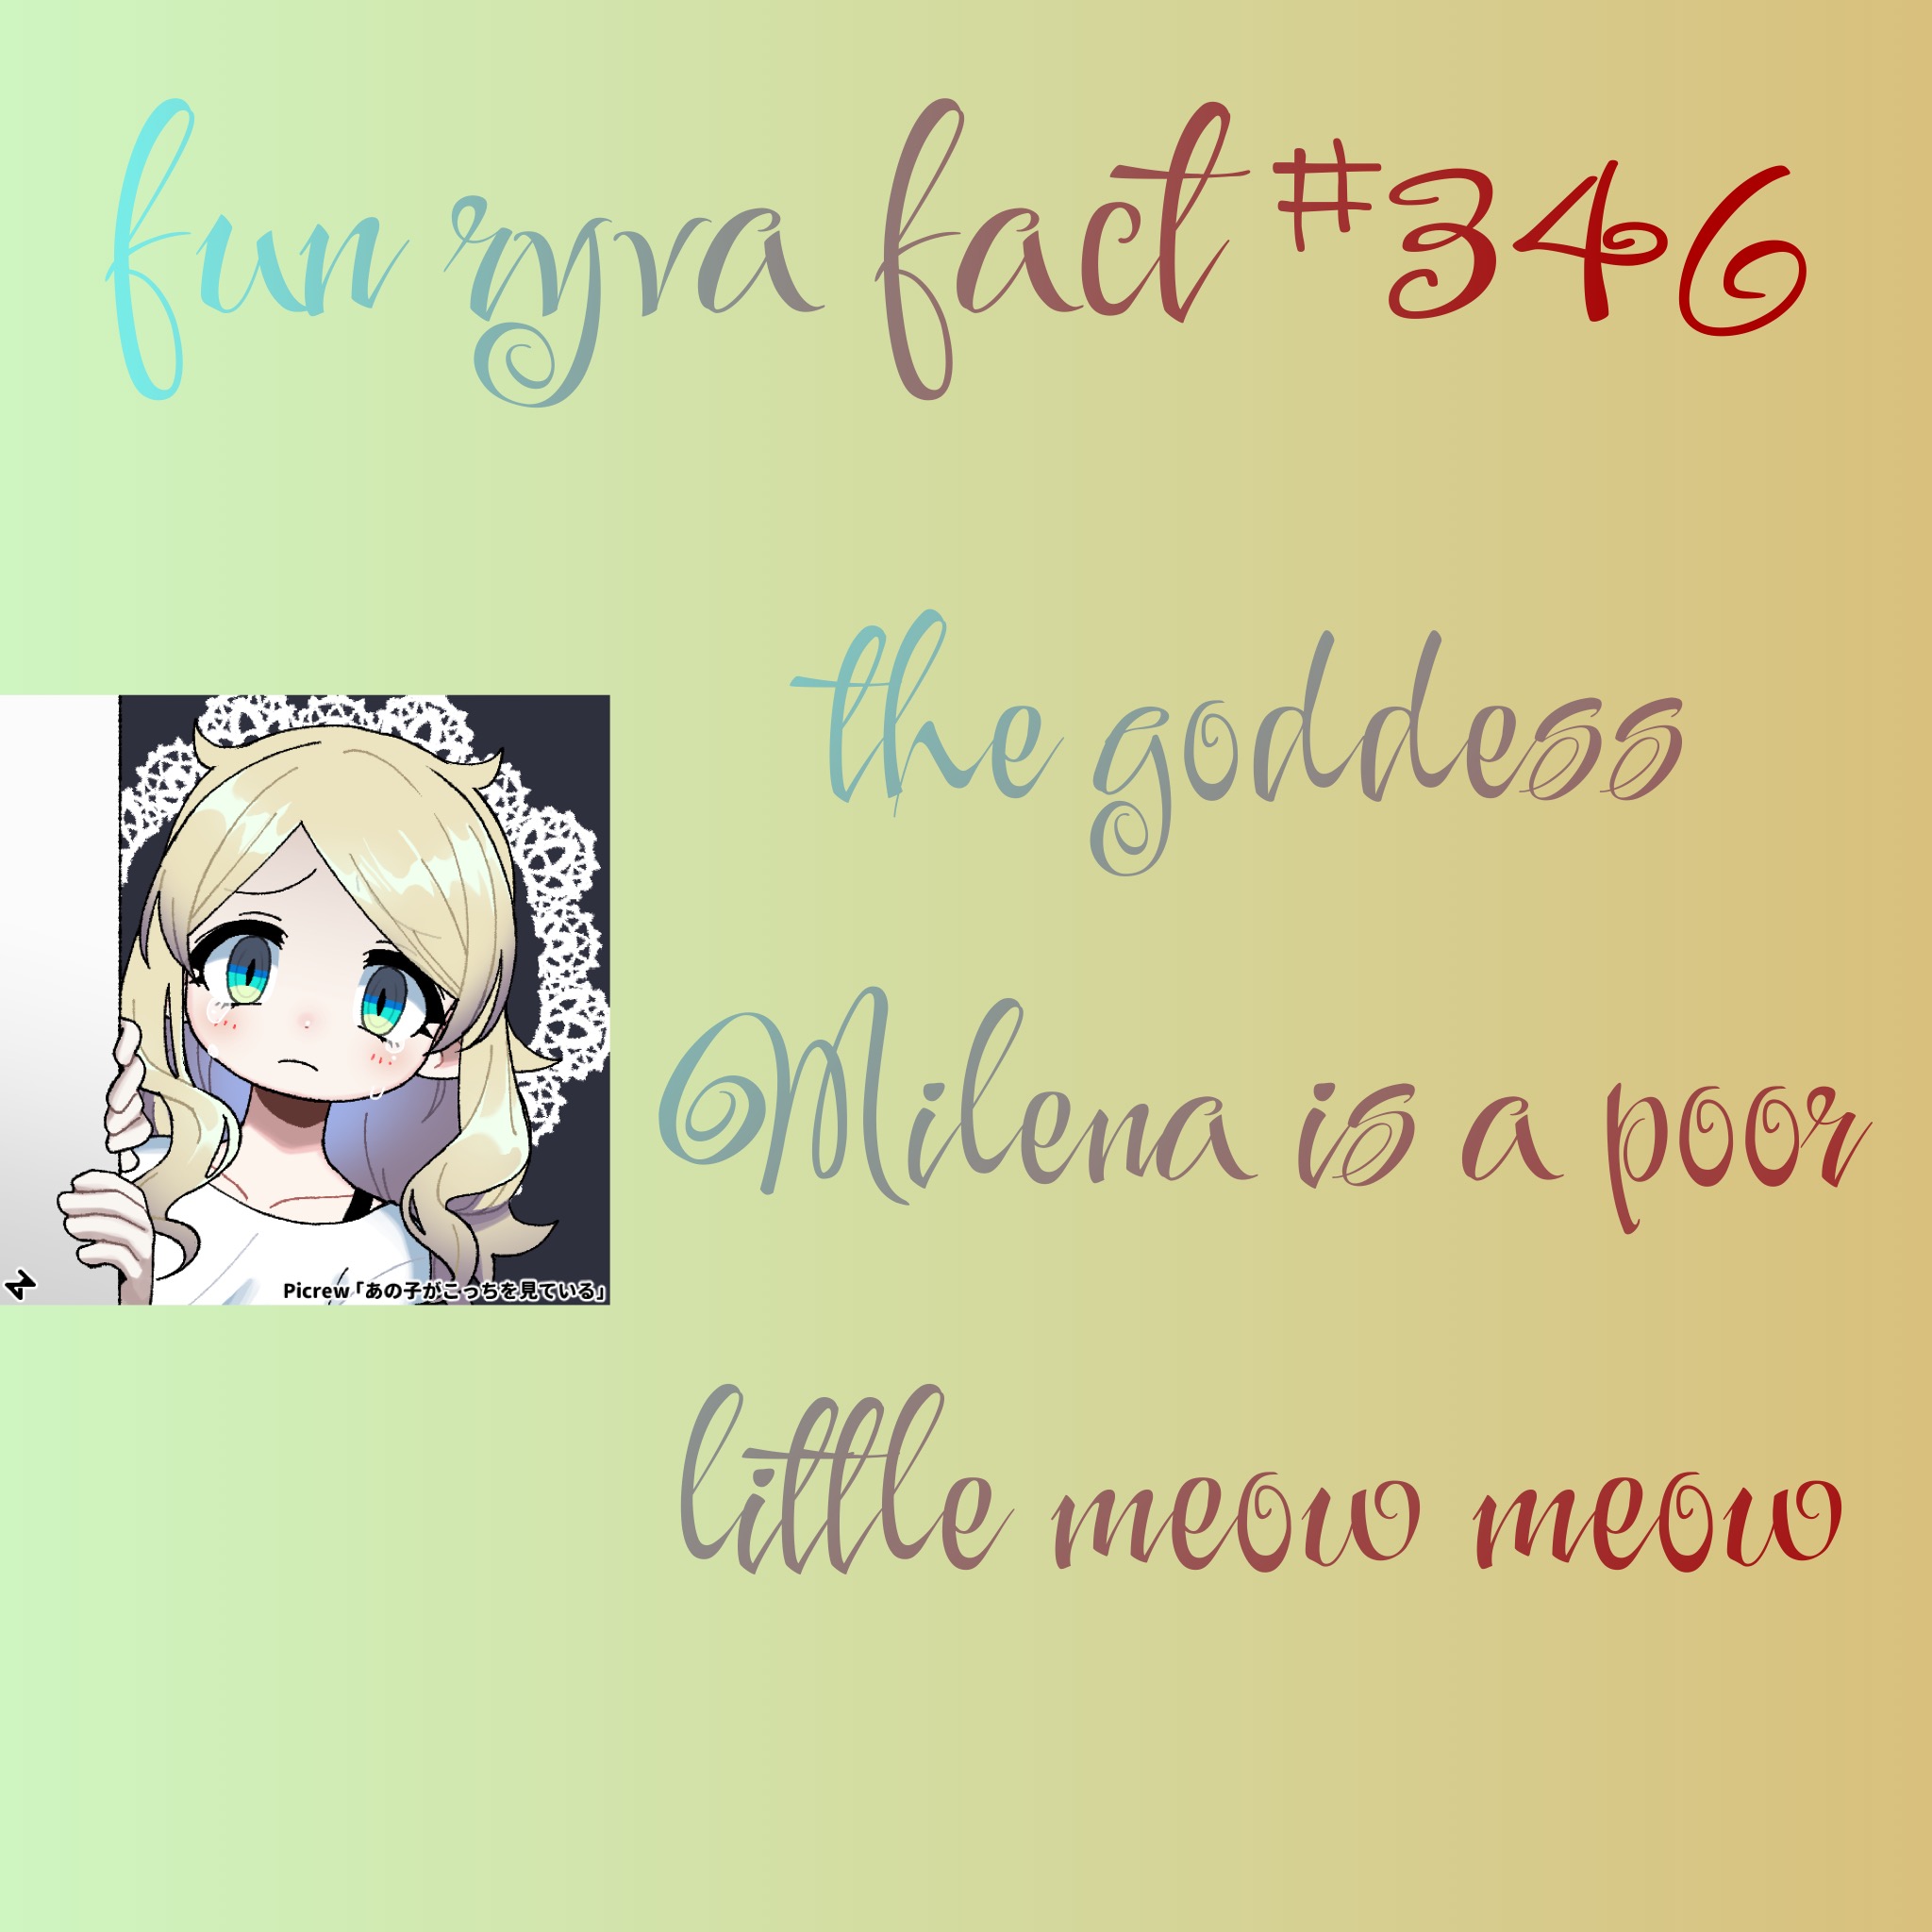 A meme reading "fun ryva fact #346" above text reading "the goddess Milena is a poor little meow meow".